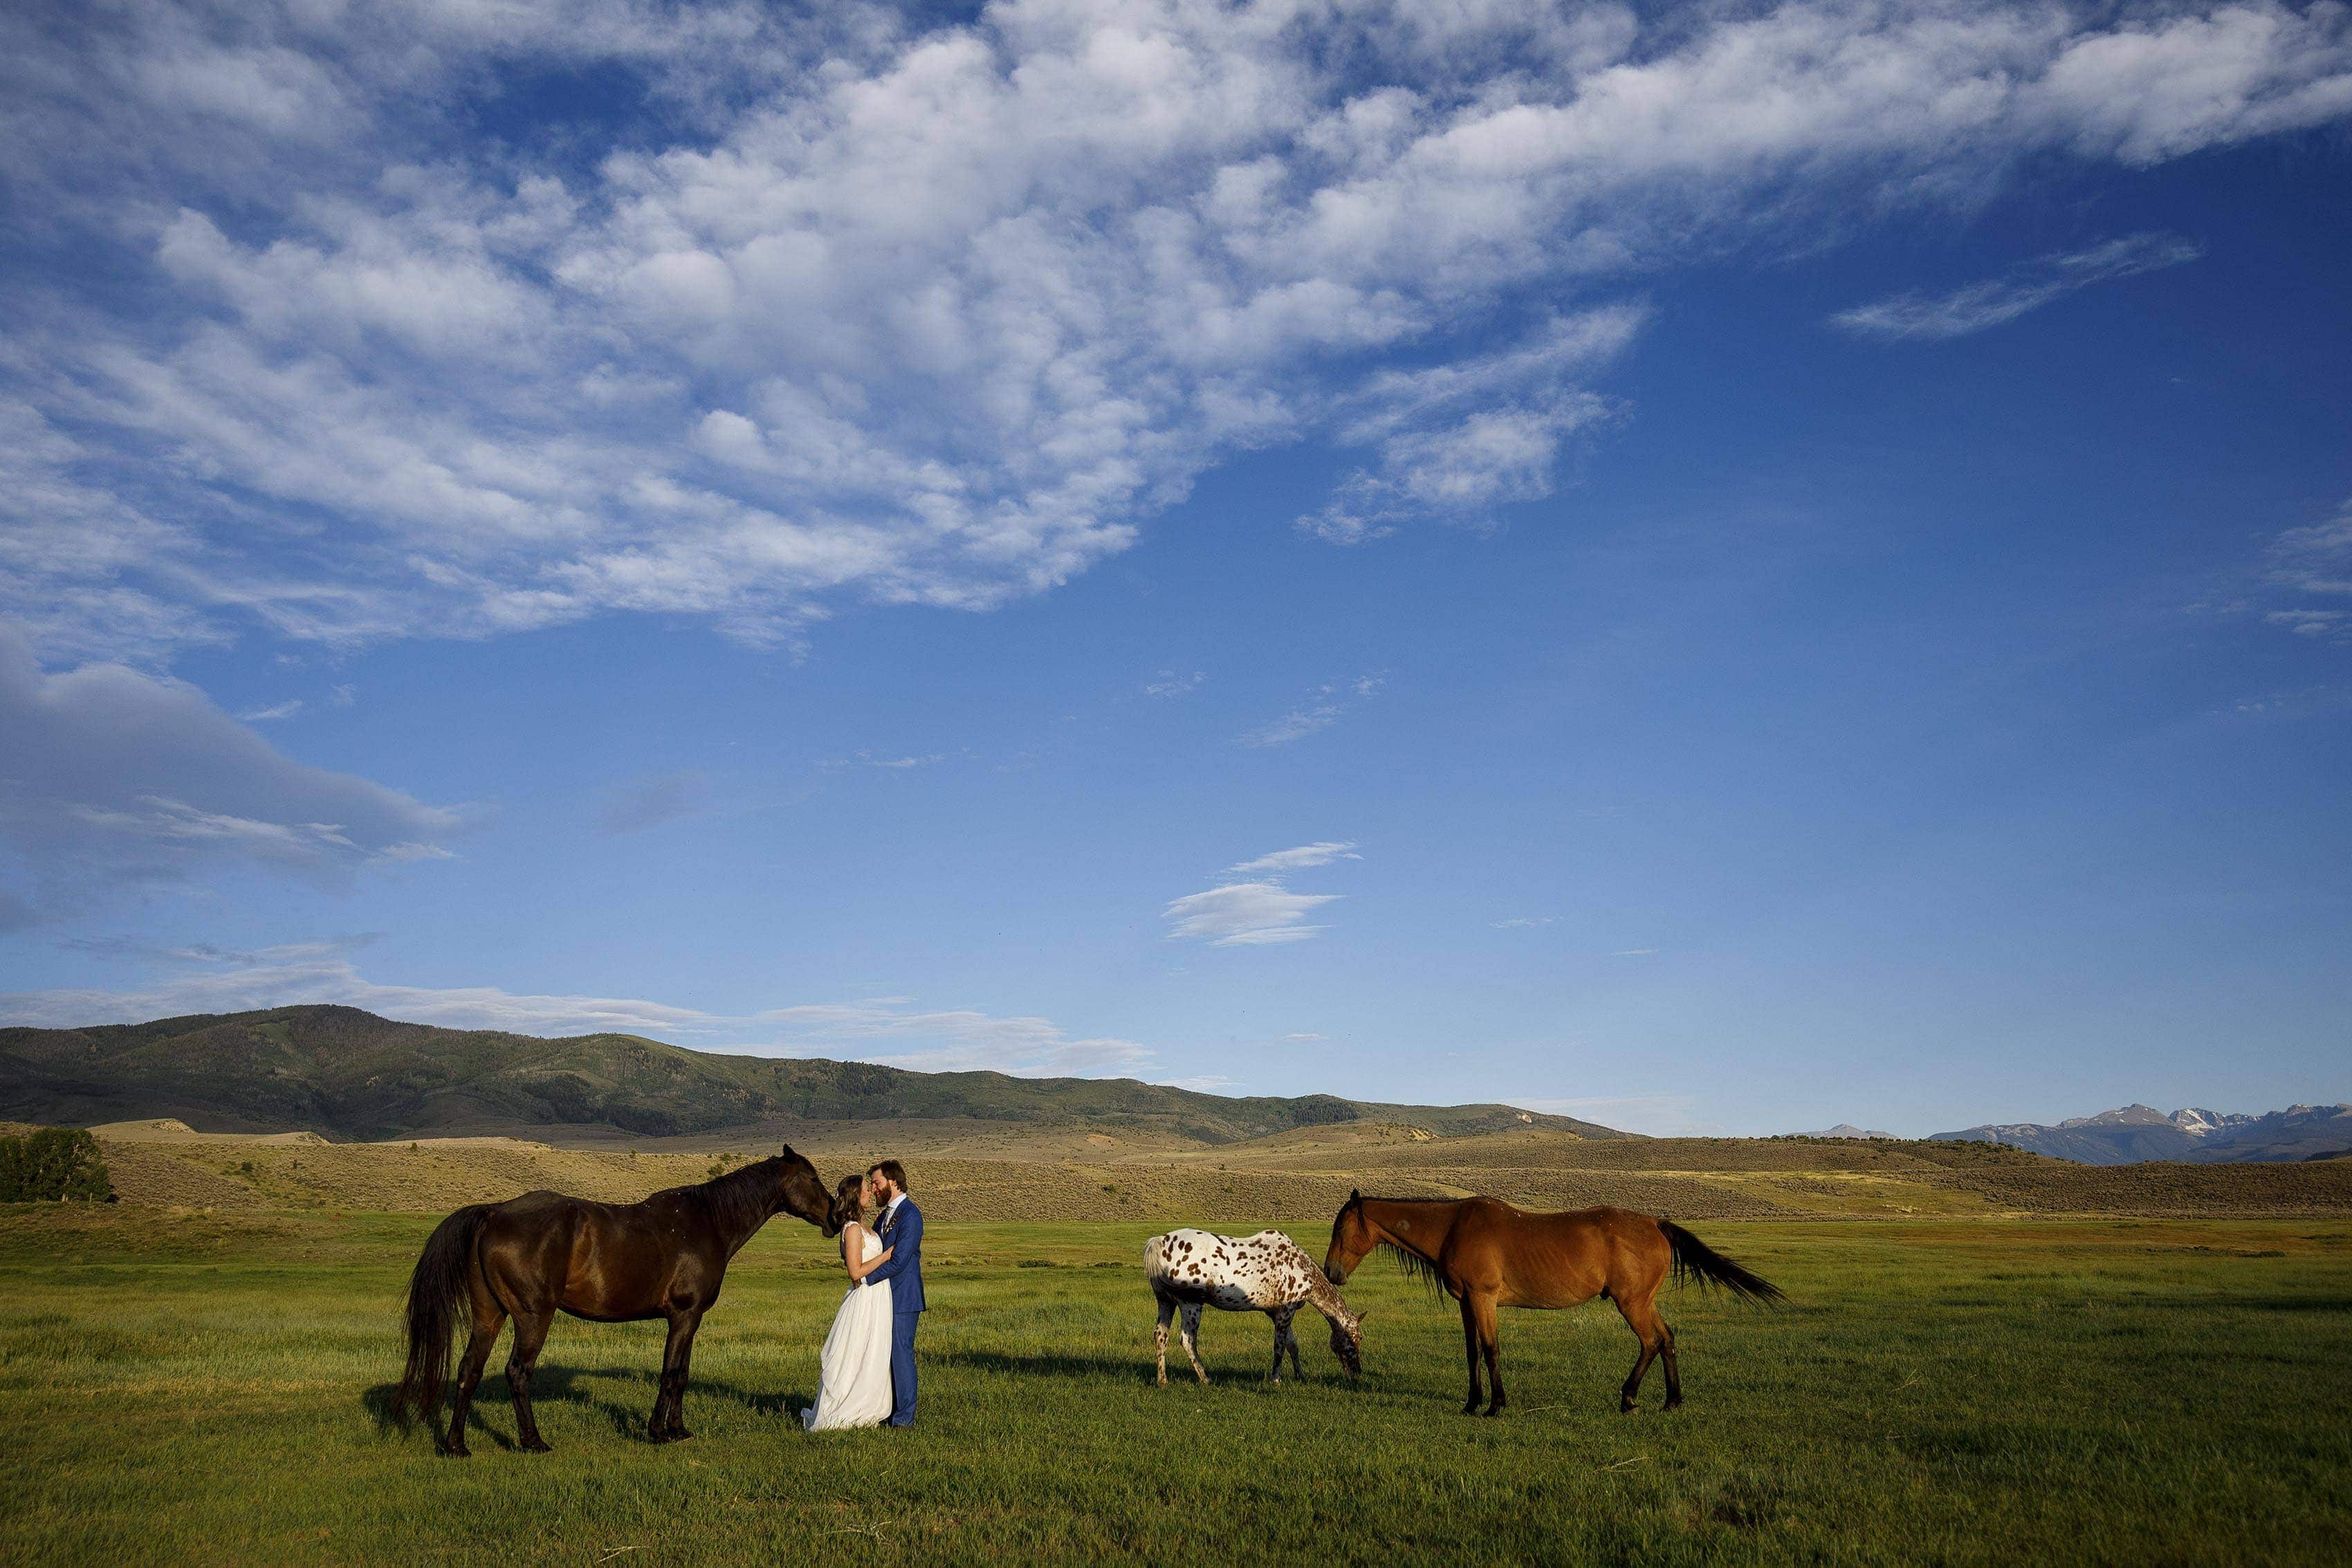 A group of wild horses graze as the newlyweds share a moment together in a field on a summer evening at 4 Eagle Ranch in Wolcott, CO